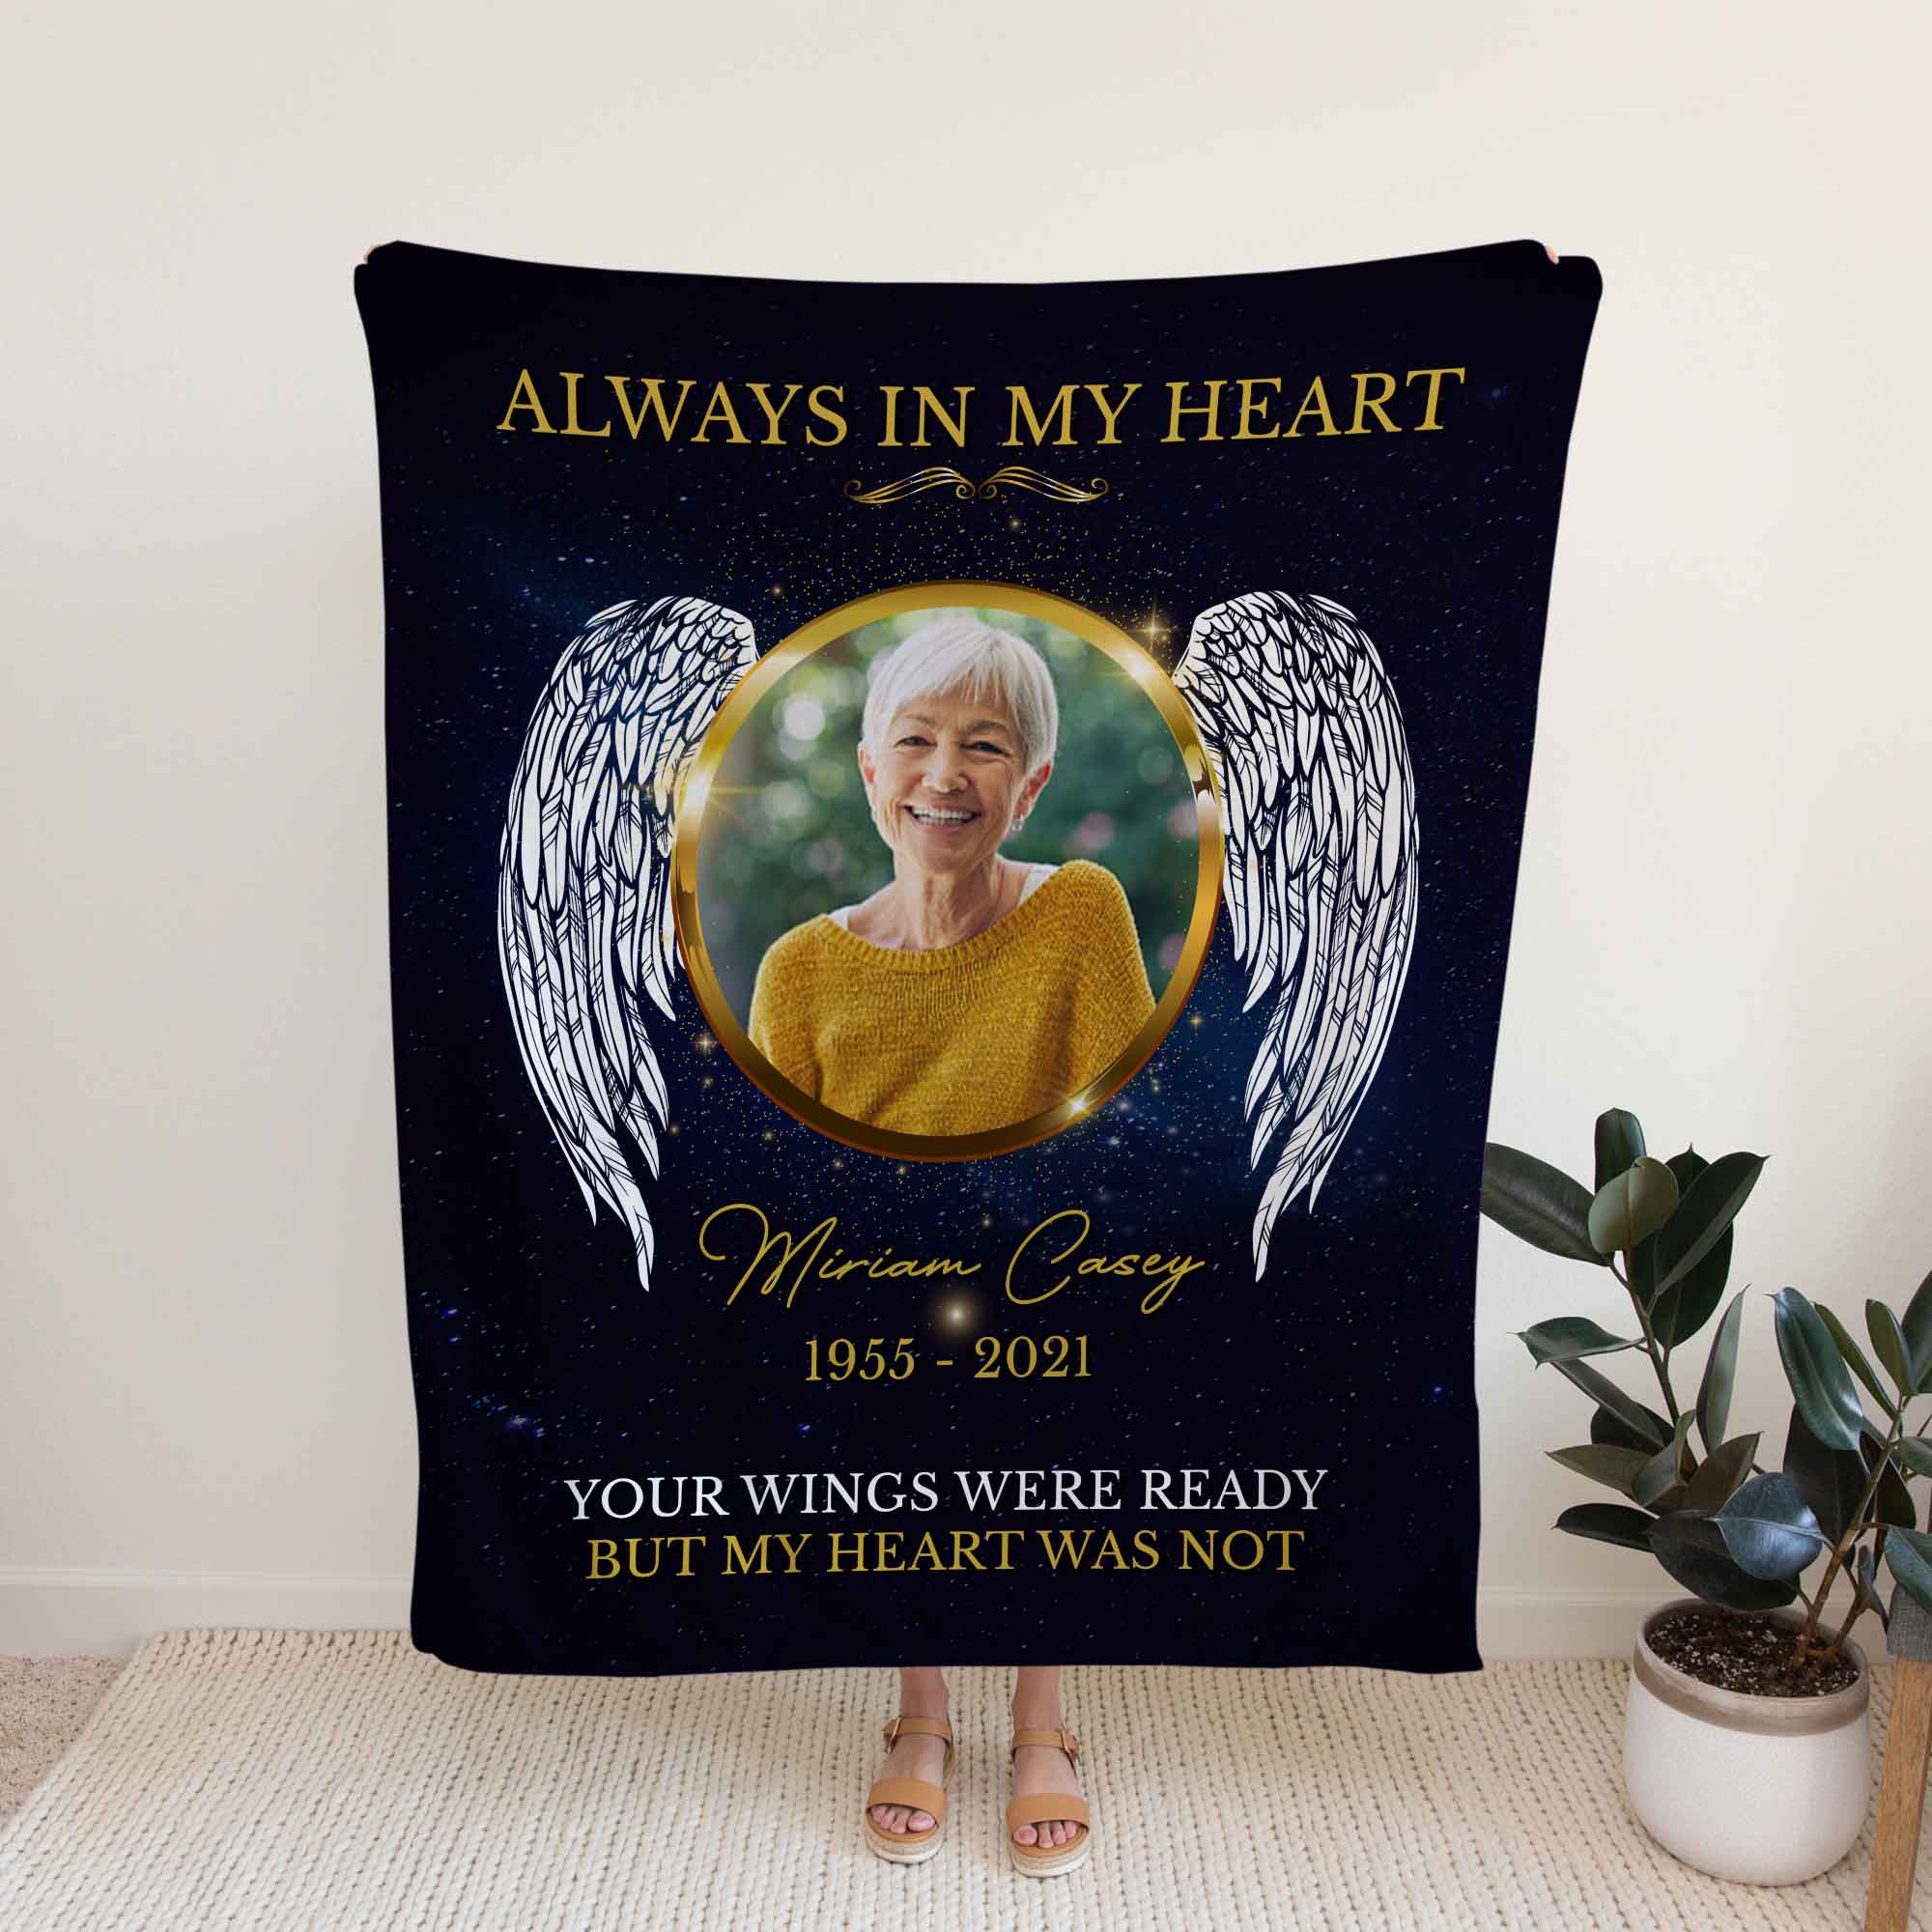 Personalized Memorial Blankets For Loss Of Mother, Custom Photo Throw Blankets, Always In My Heart